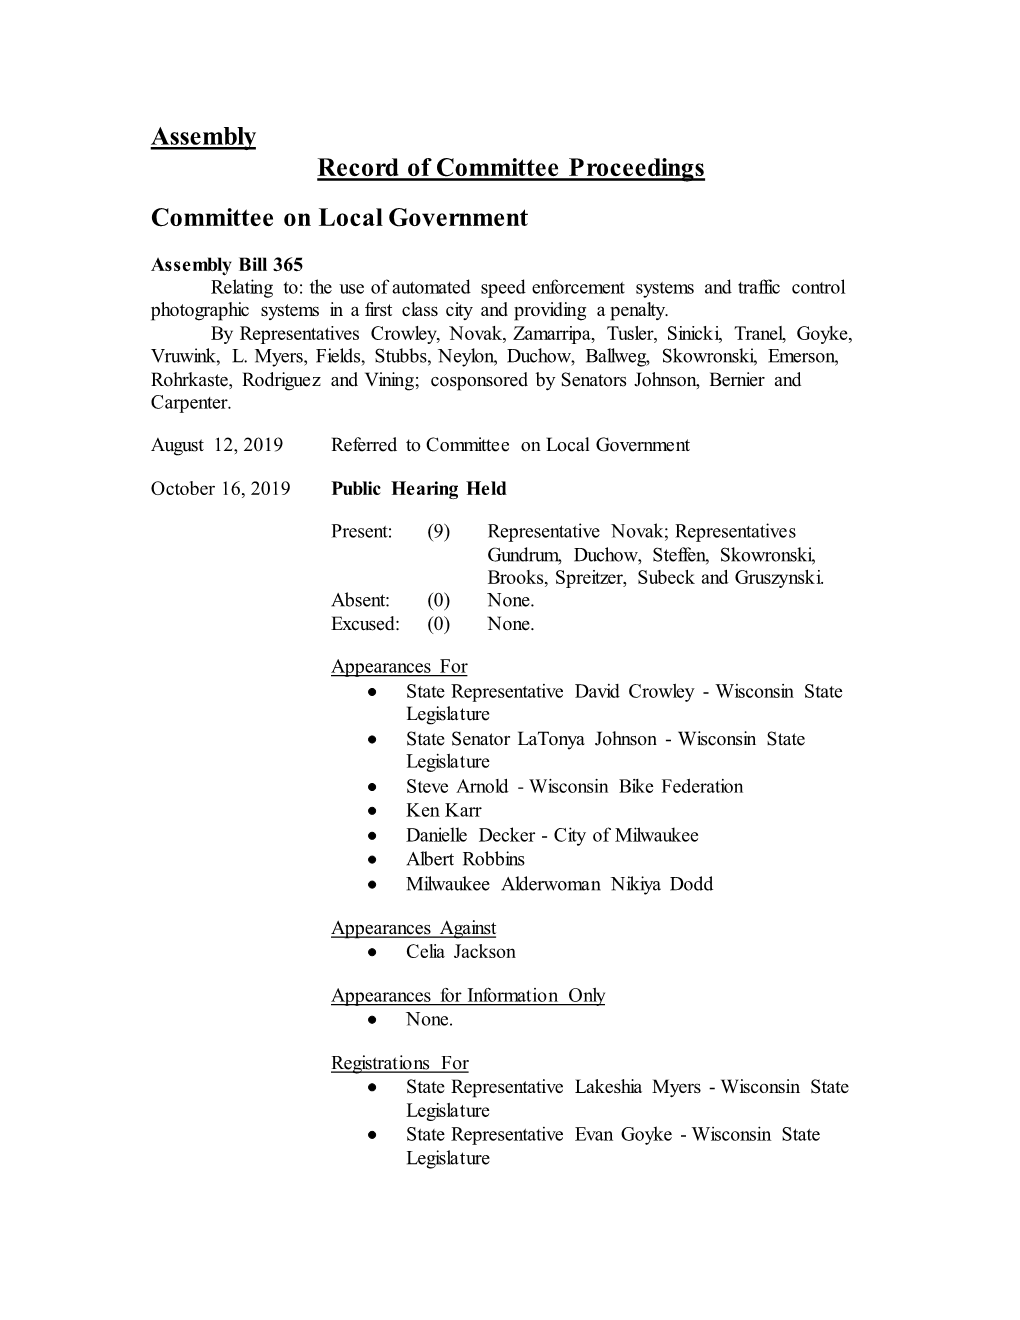 Assembly Record of Committee Proceedings Committee on Local